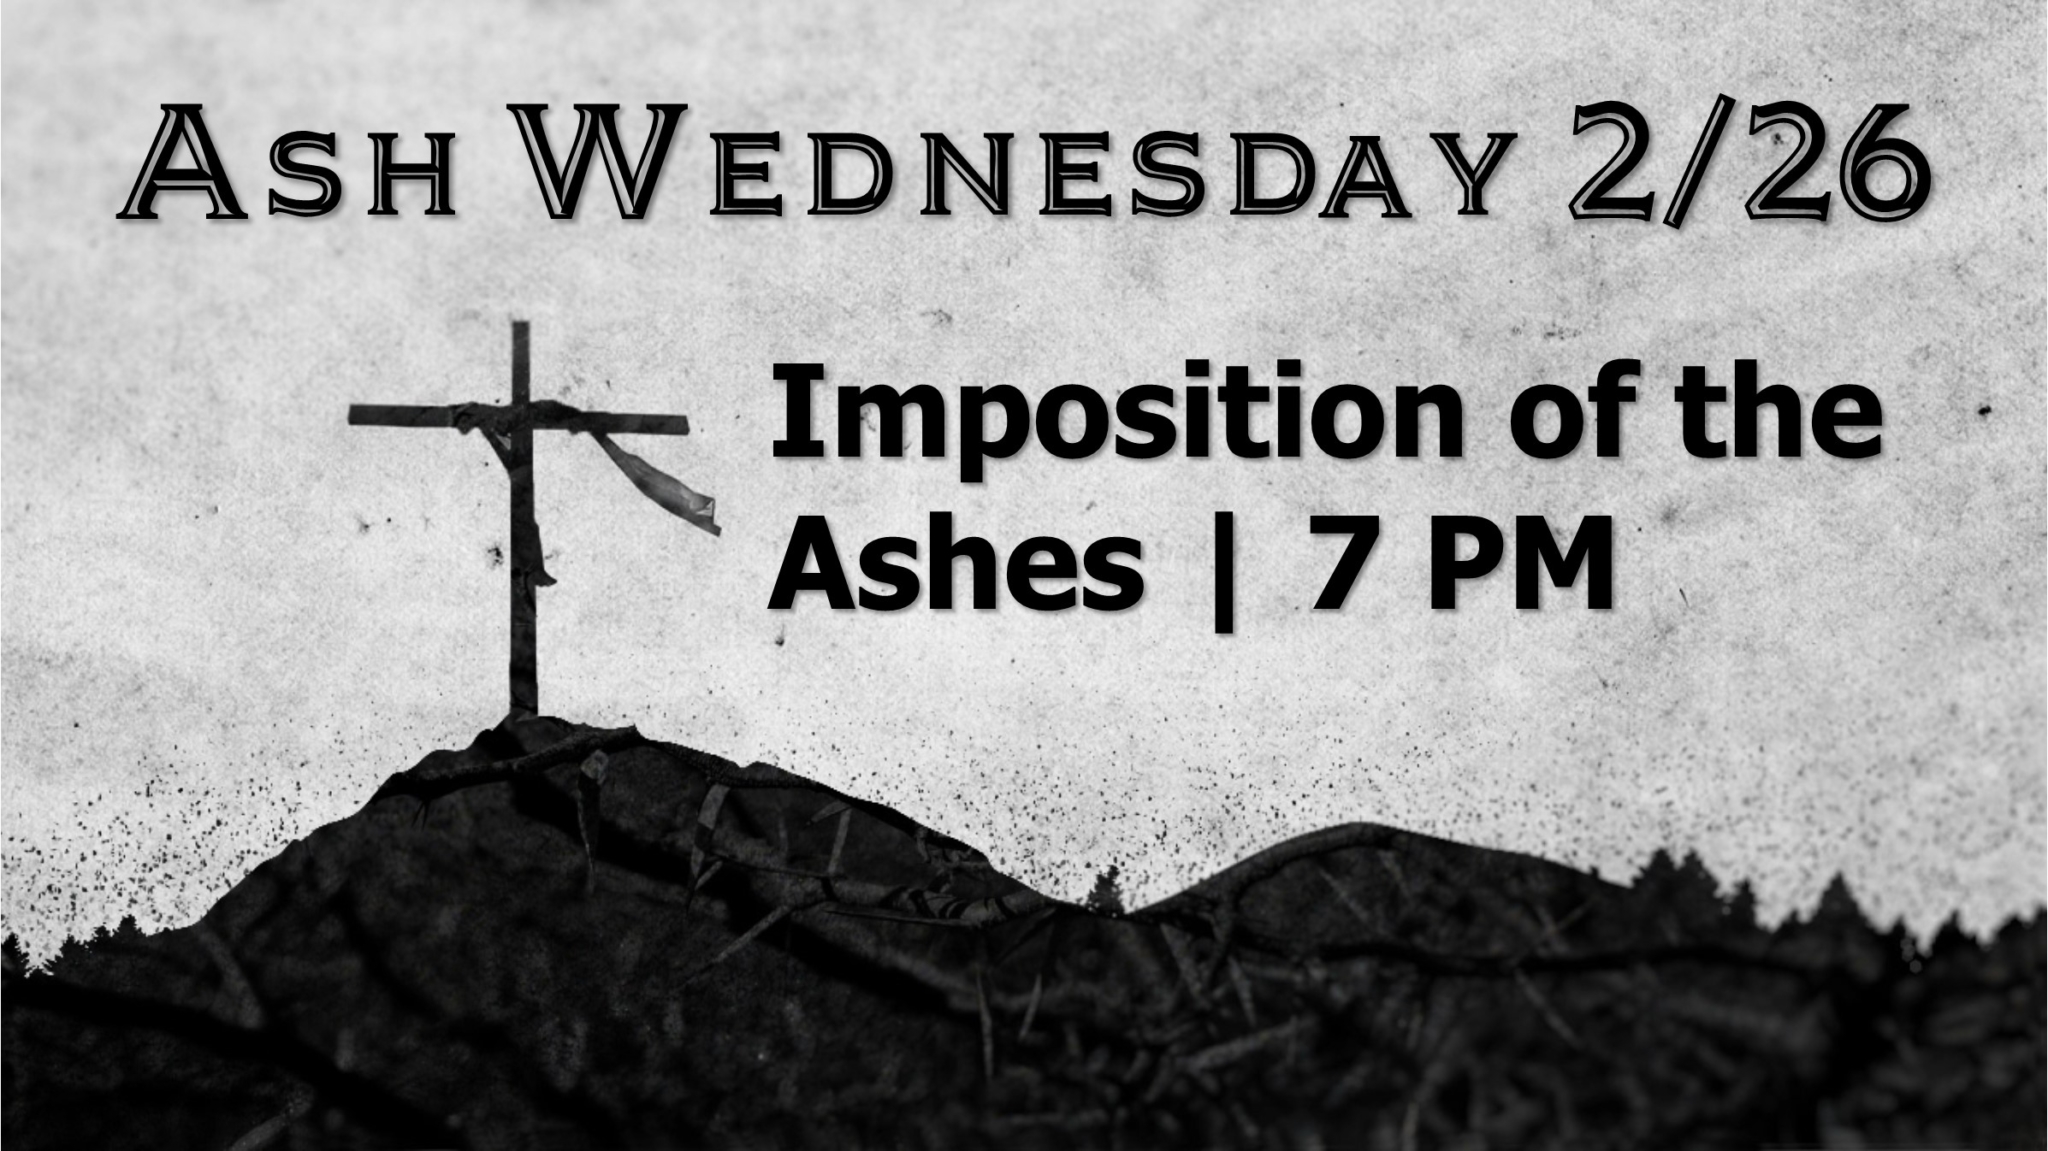 how old is the imposition of ashes